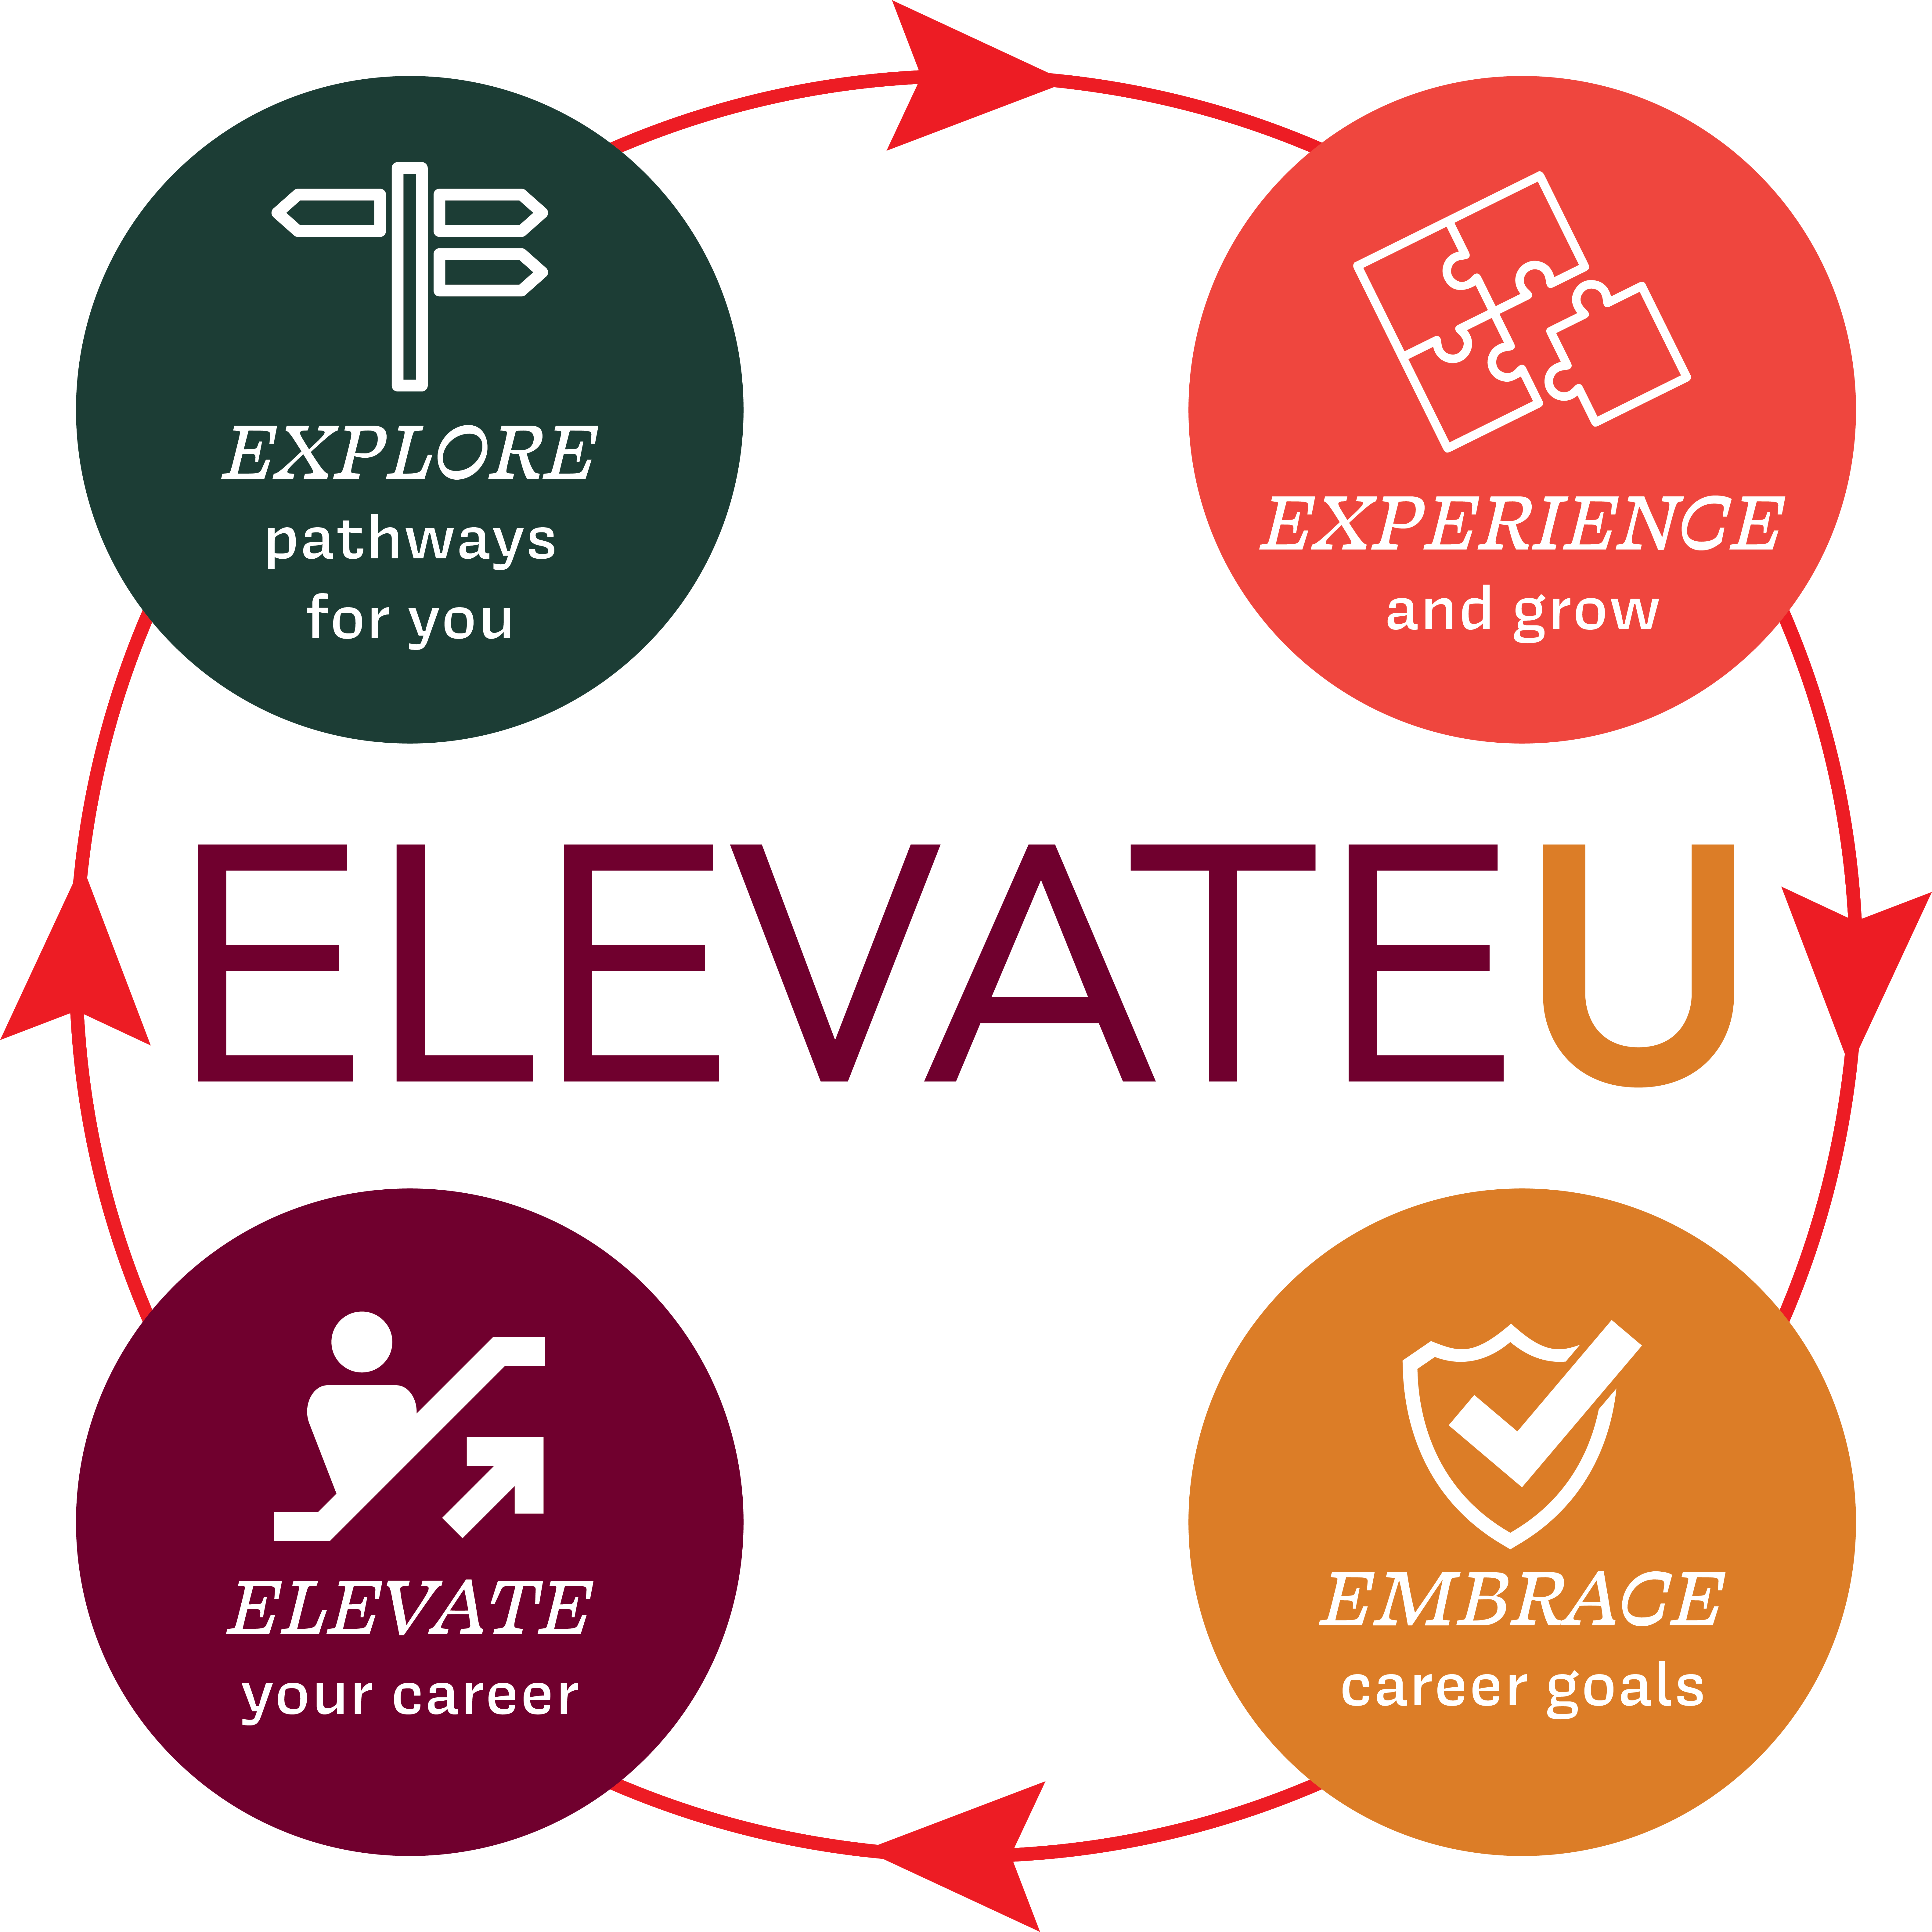 graphic showing 4 key components of the elevateu program: explore pathways for you, experience and grow, embrace career goals, and elevate your career.